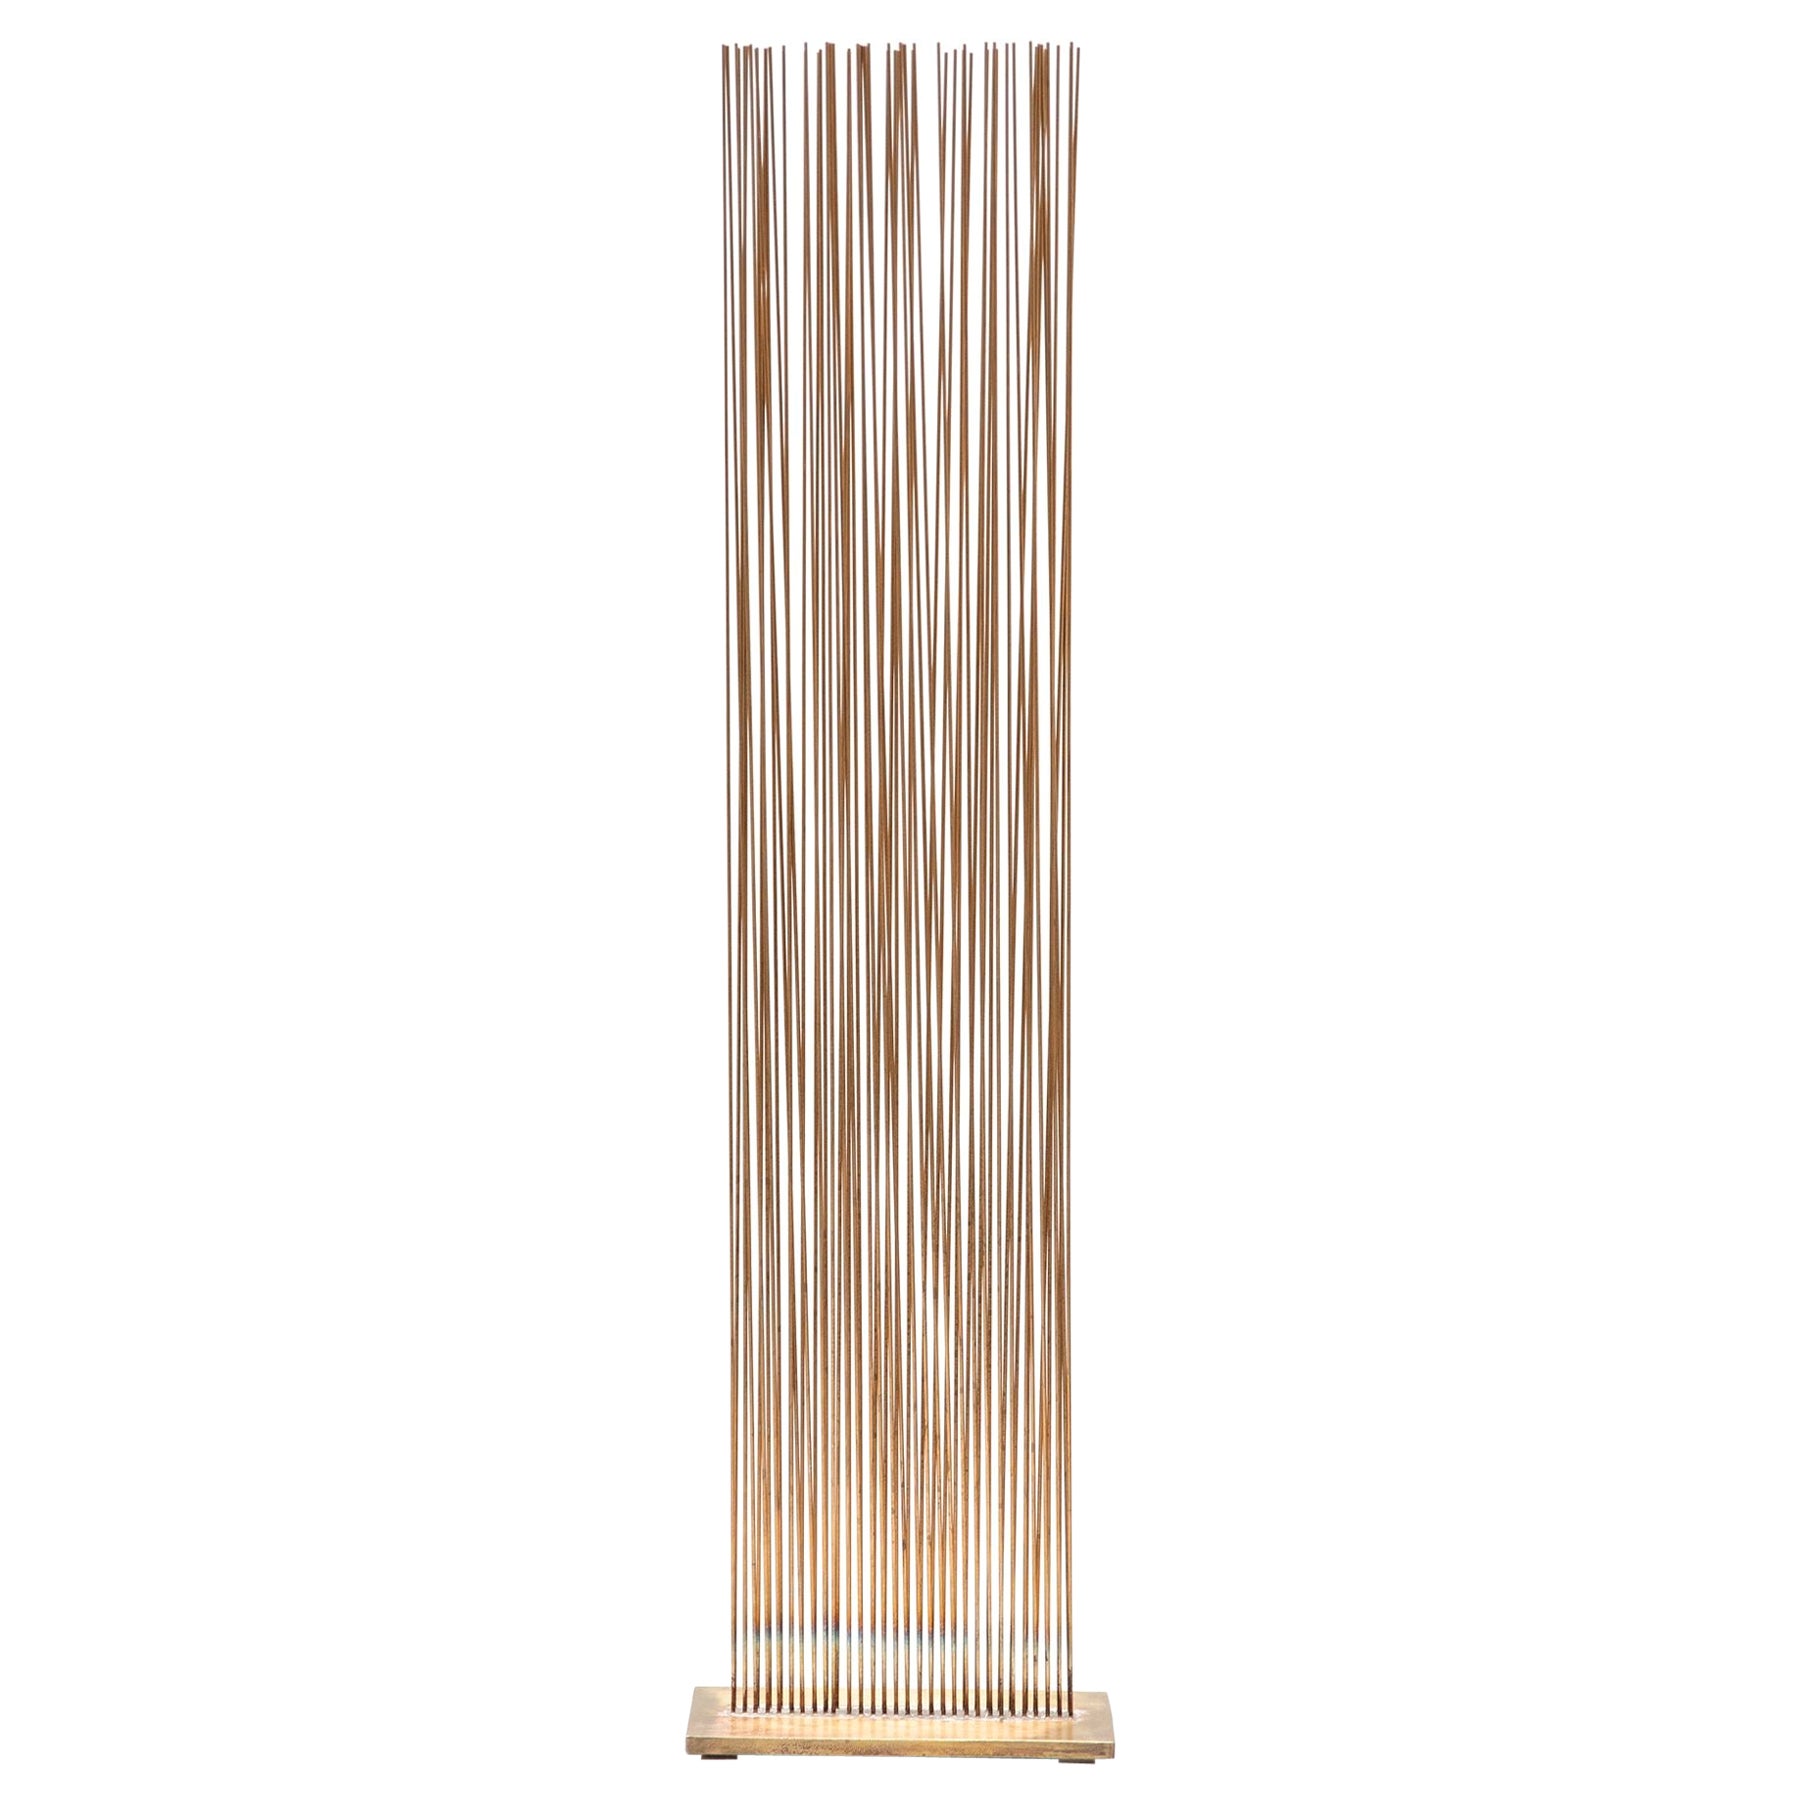 Val Bertoia 'Sound of V' Sonambient Sculpture Silicon Bronze Rods in Brass Base For Sale